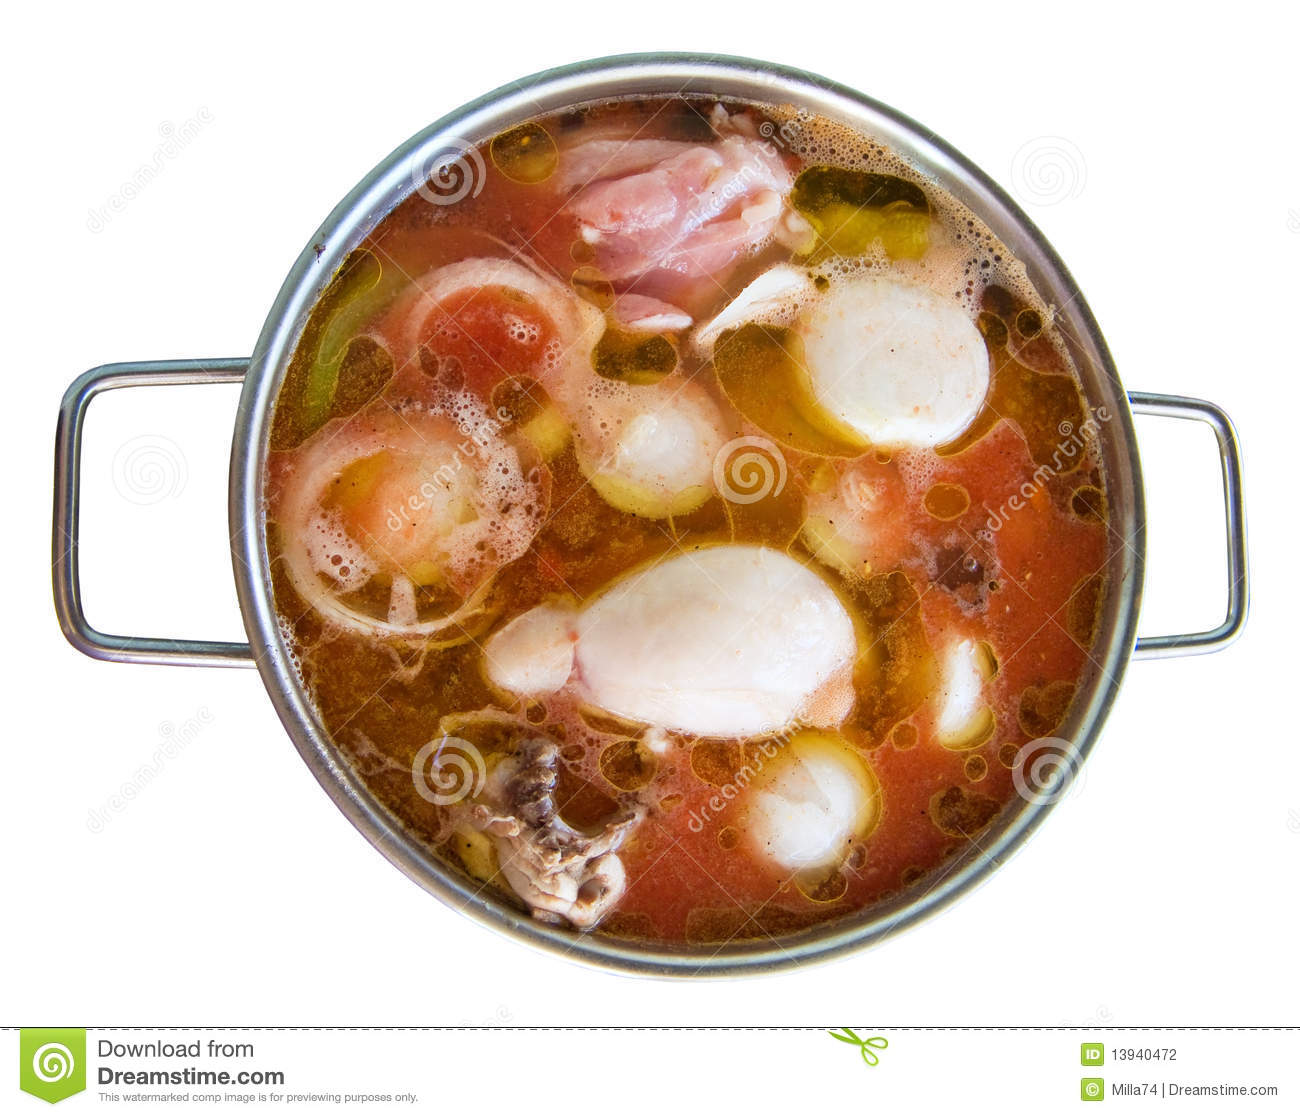 Chicken And Vegetable Broth  Stock Photography   Image  13940472